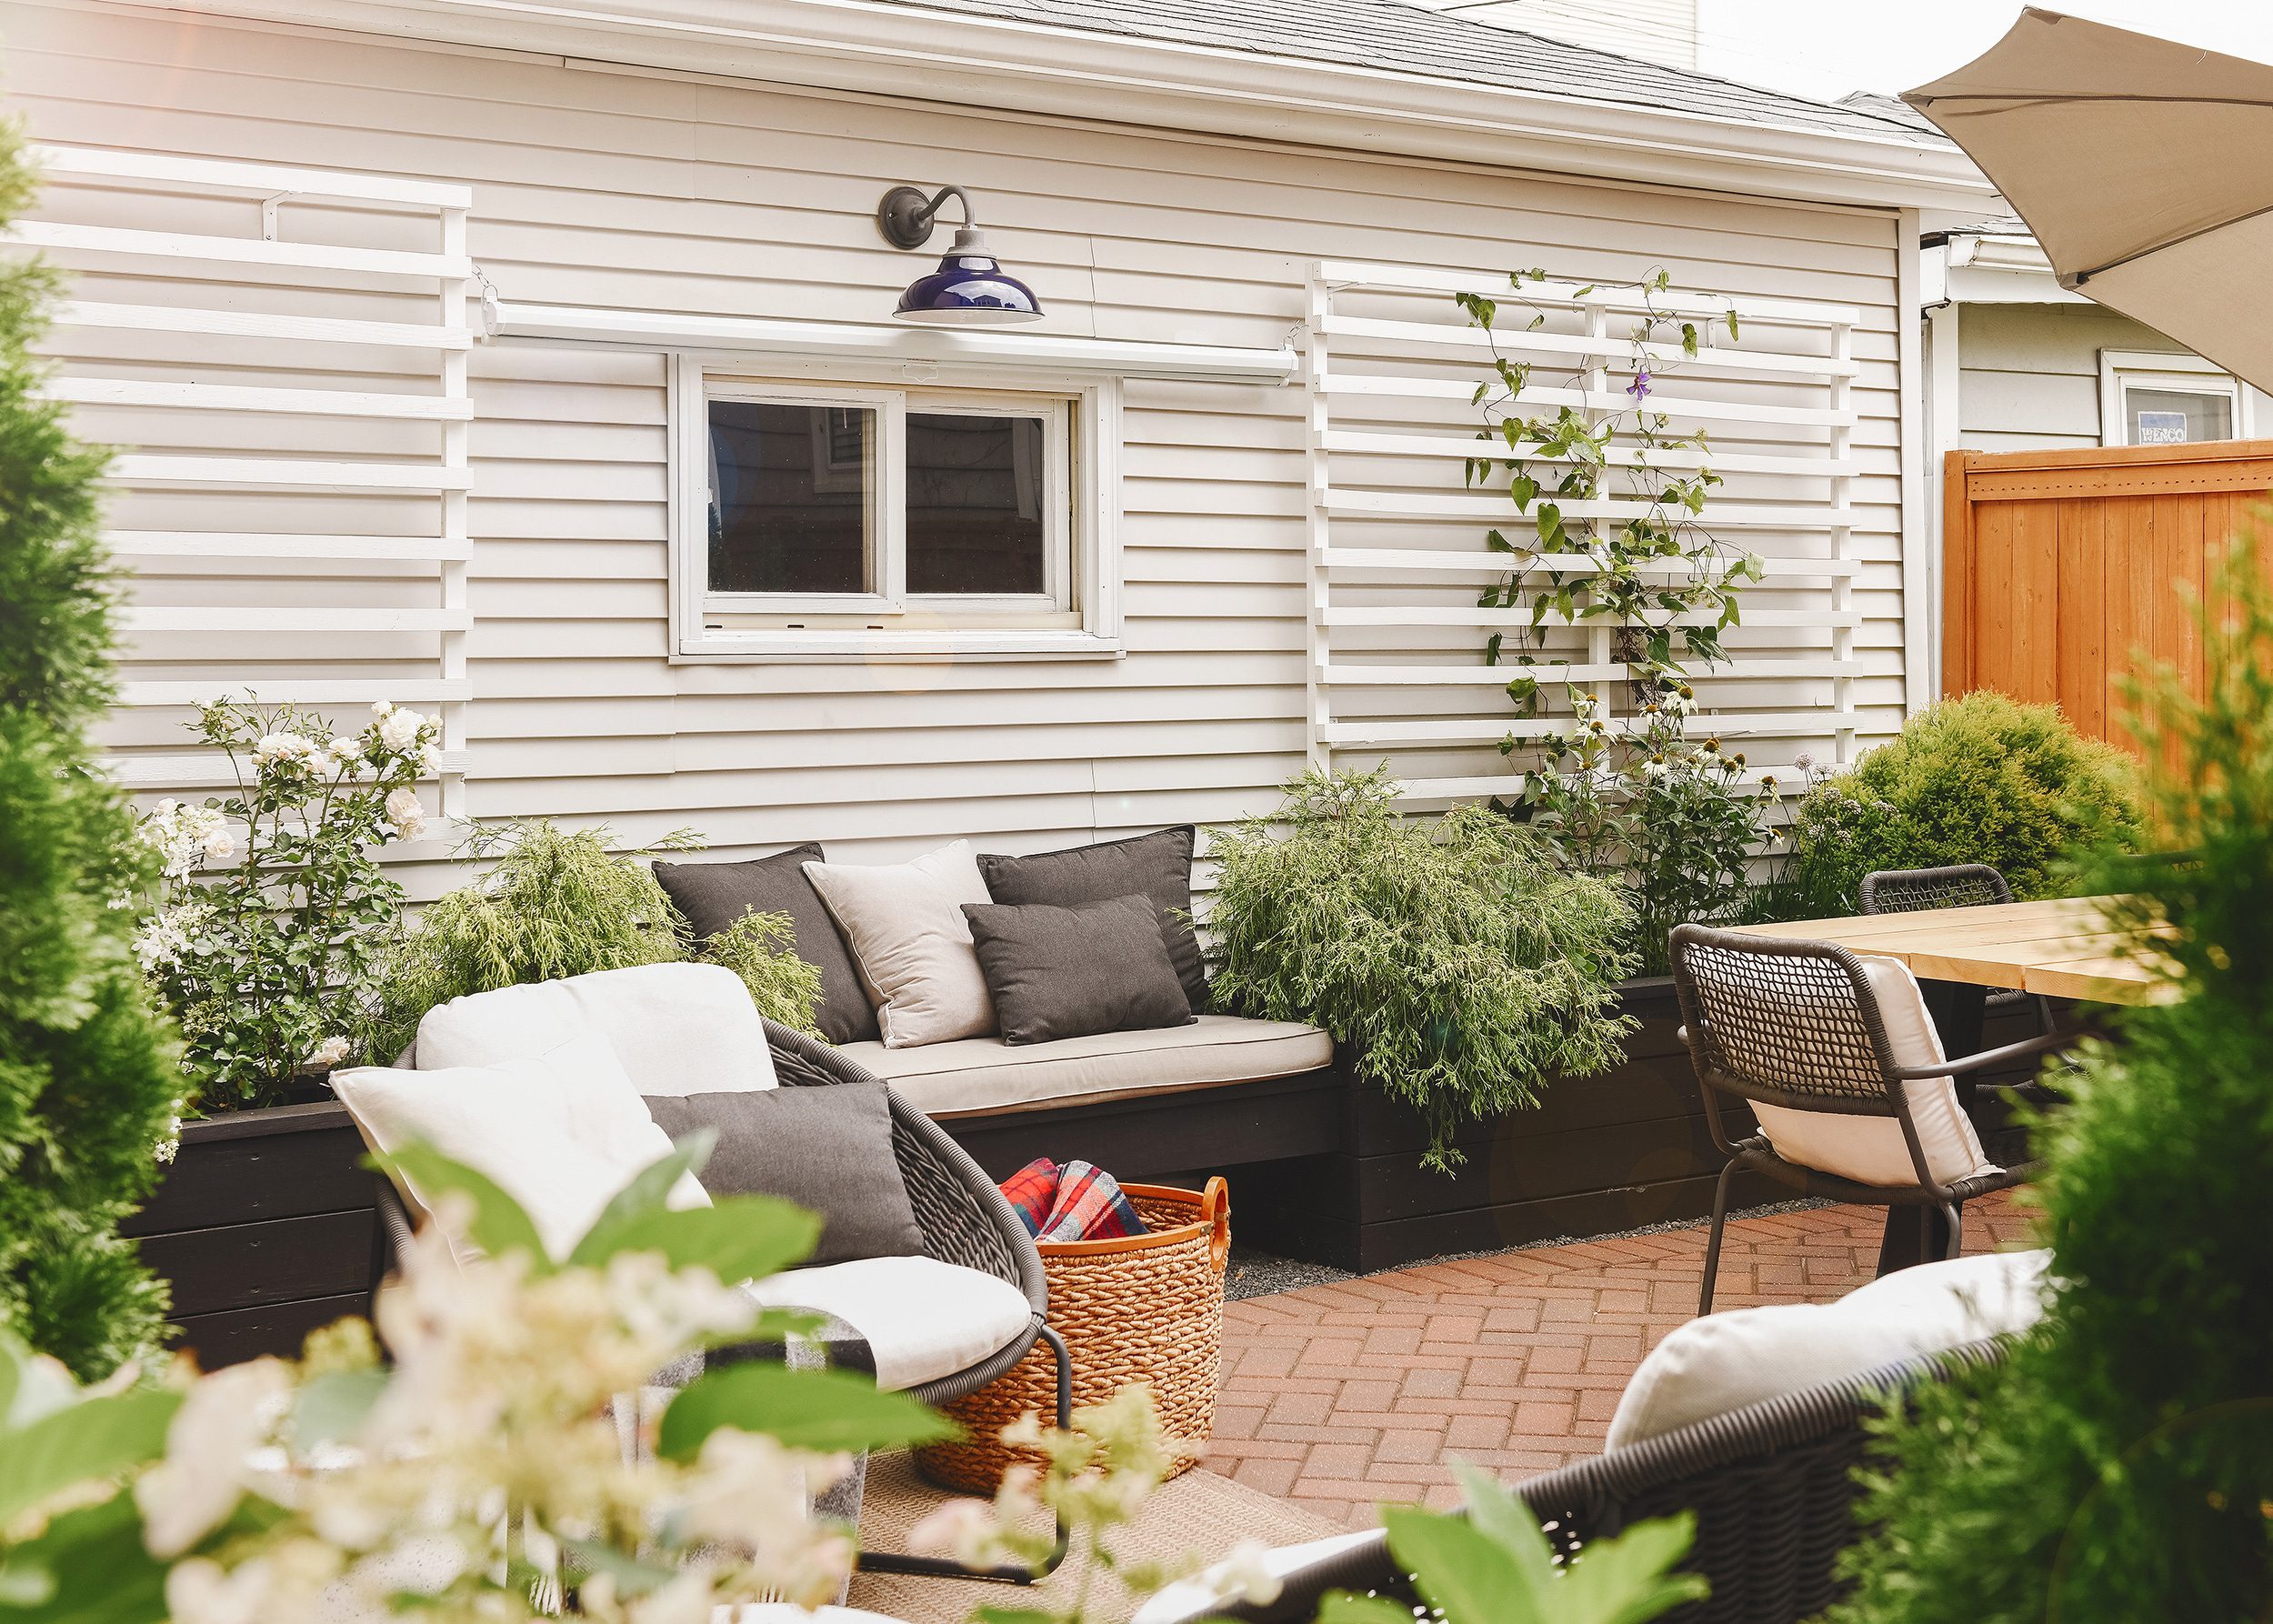 A side view of our small Chicago backyard | via Yellow Brick Home